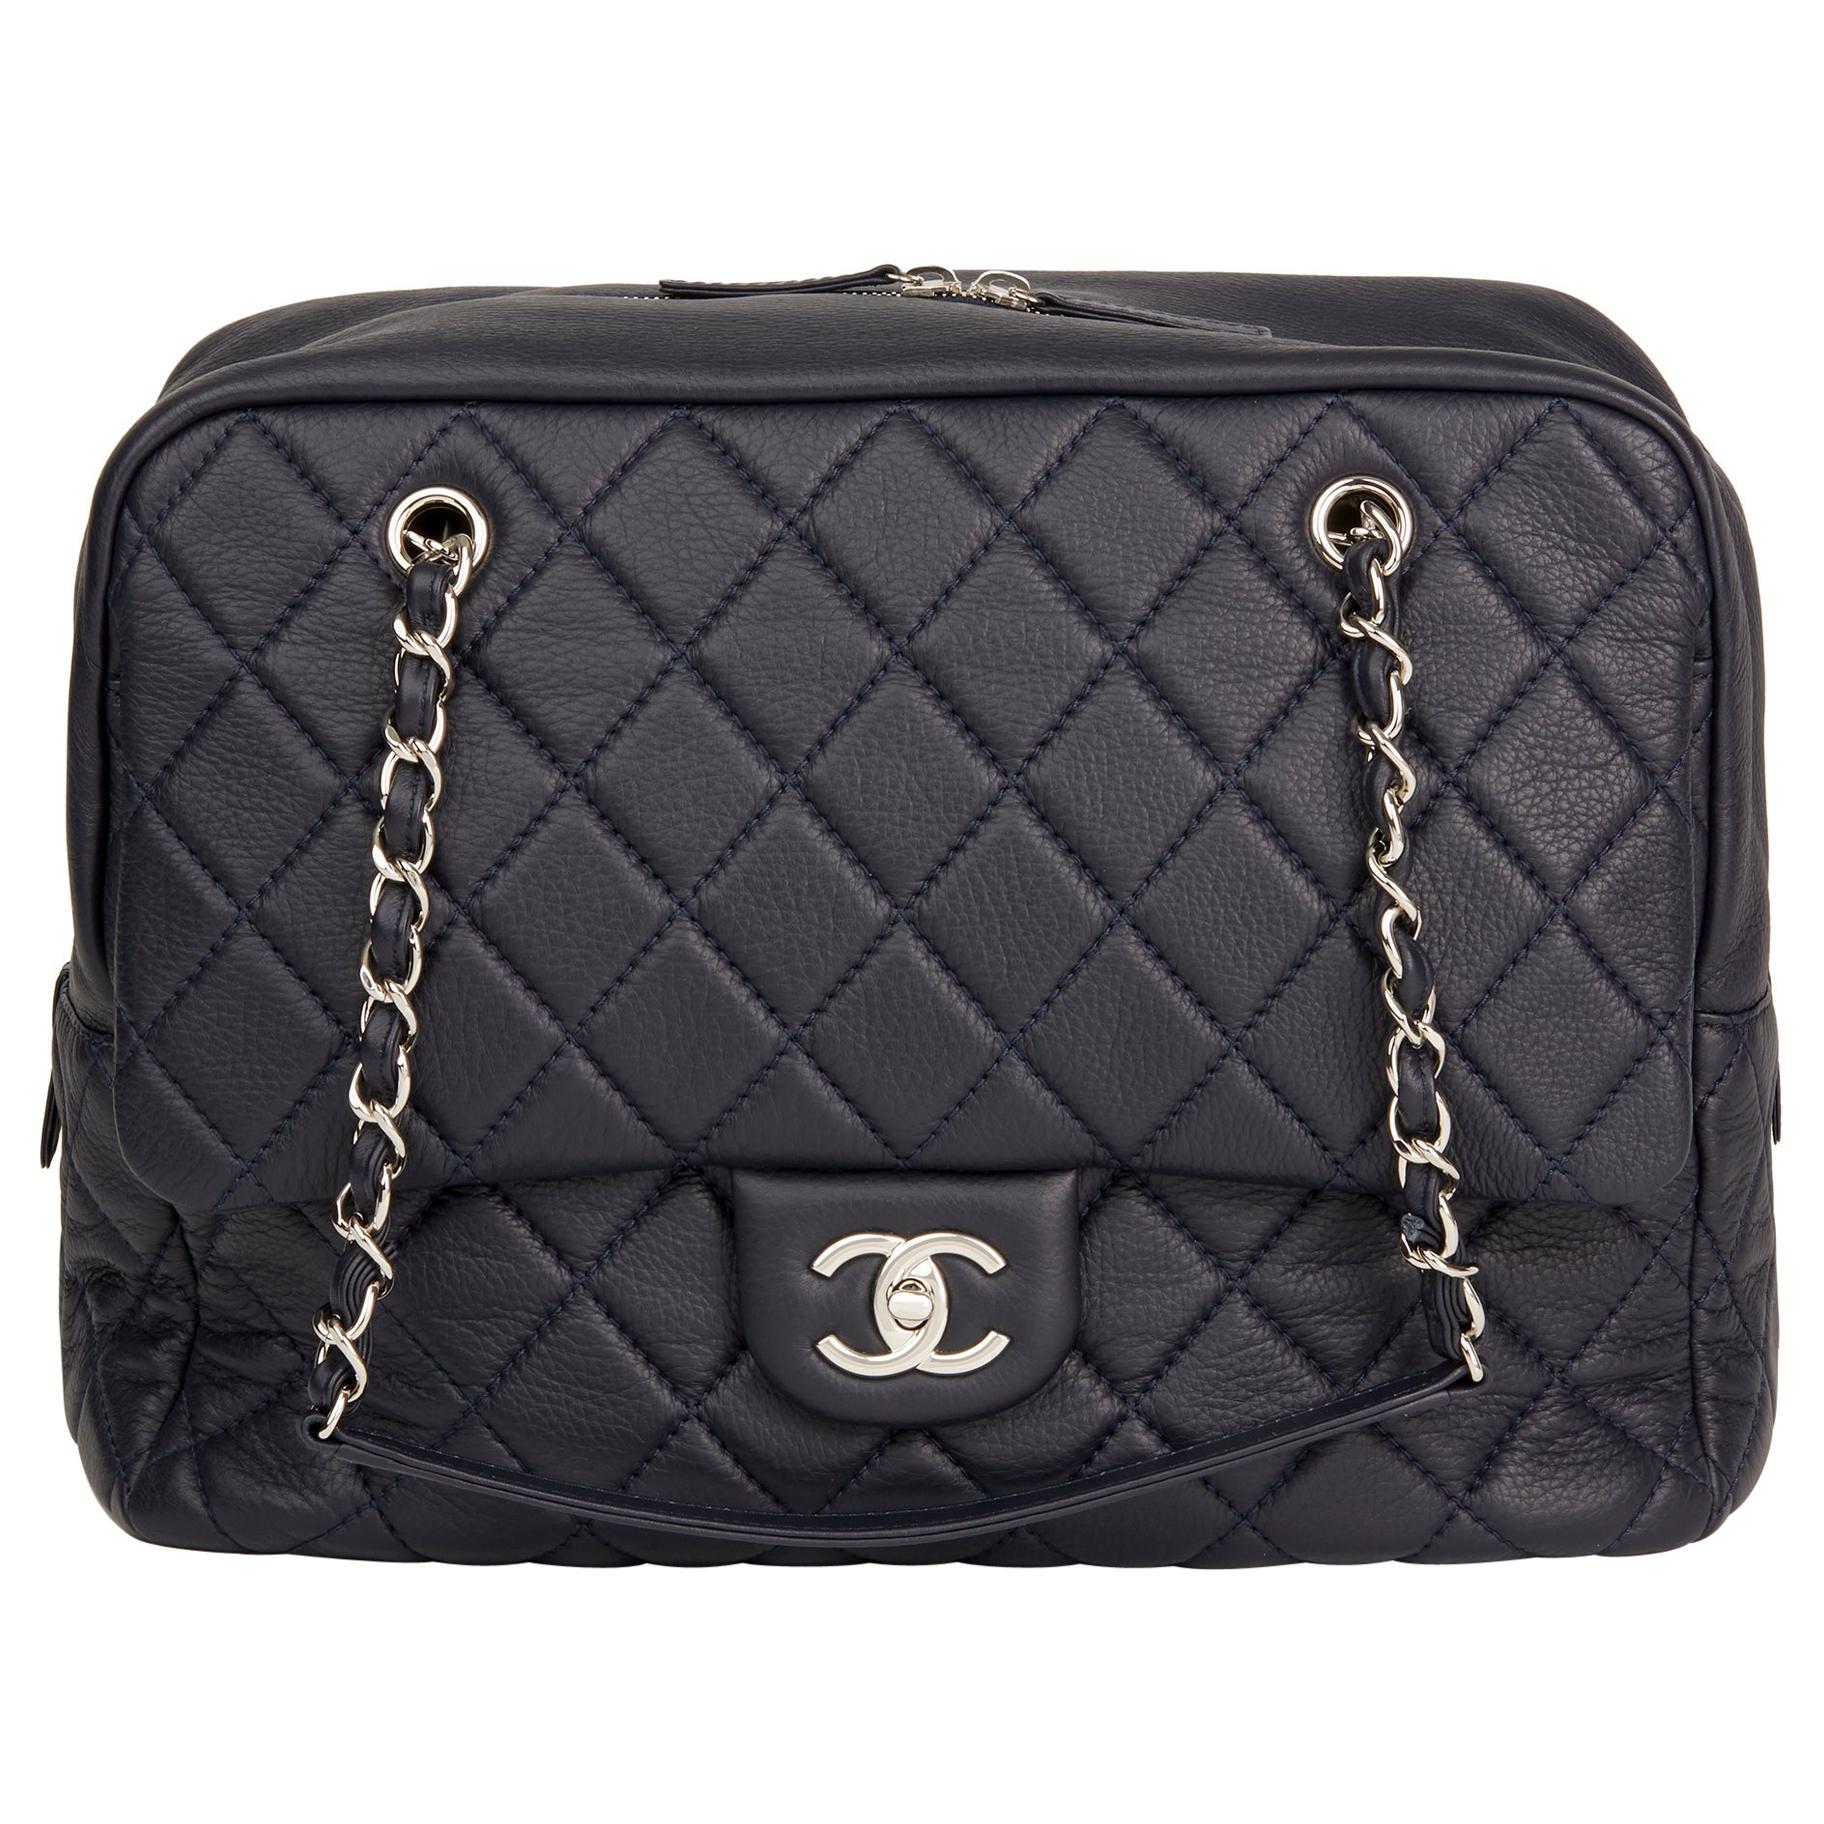 2016 Chanel Navy Quilted Calfskin Leather Jumbo Classic Camera Bag